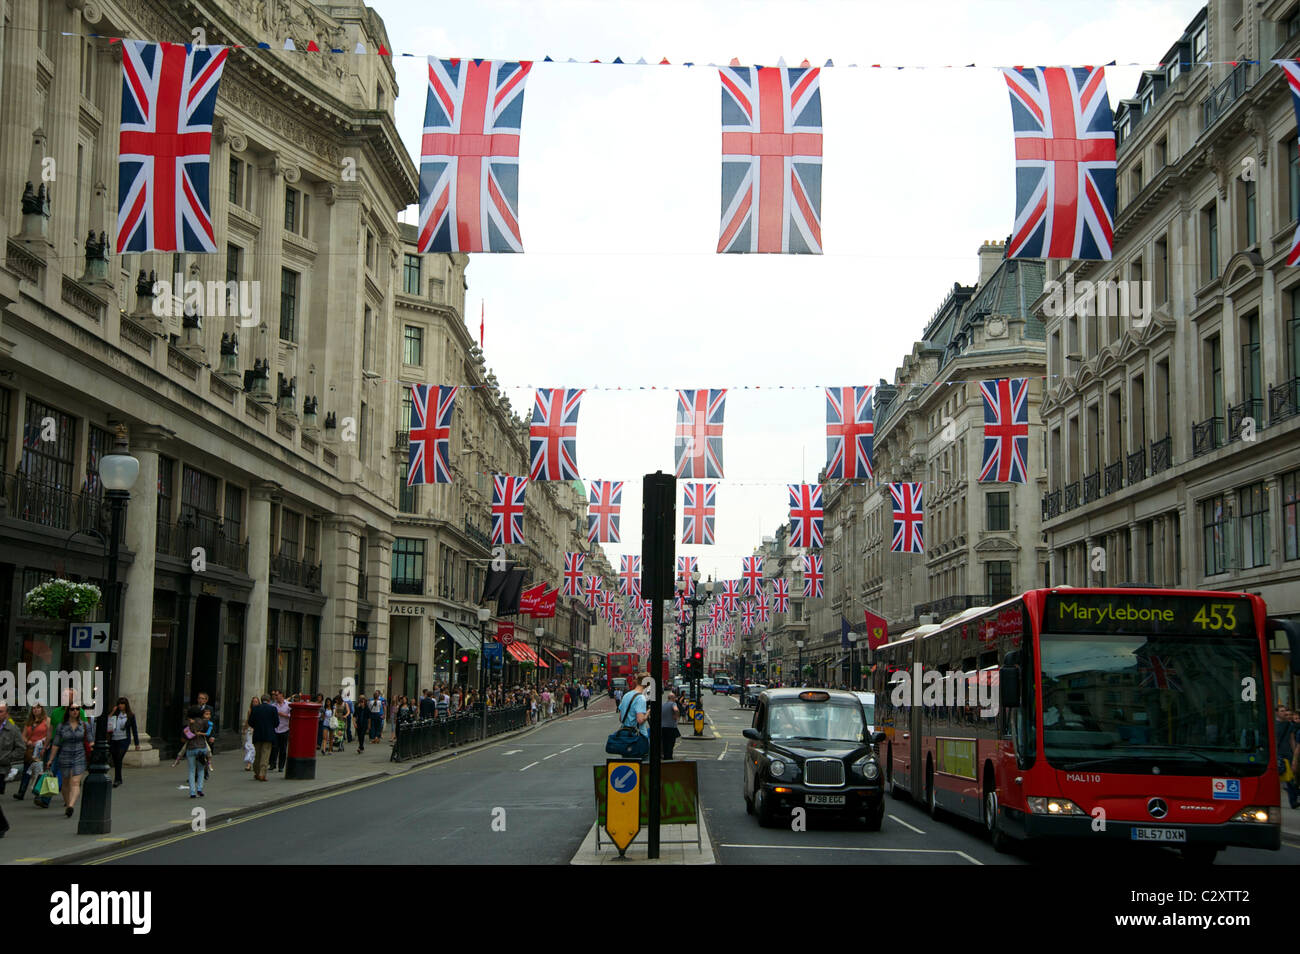 Regent's Street decked out ready for the wedding of Prince William and Catherine Middleton. Stock Photo